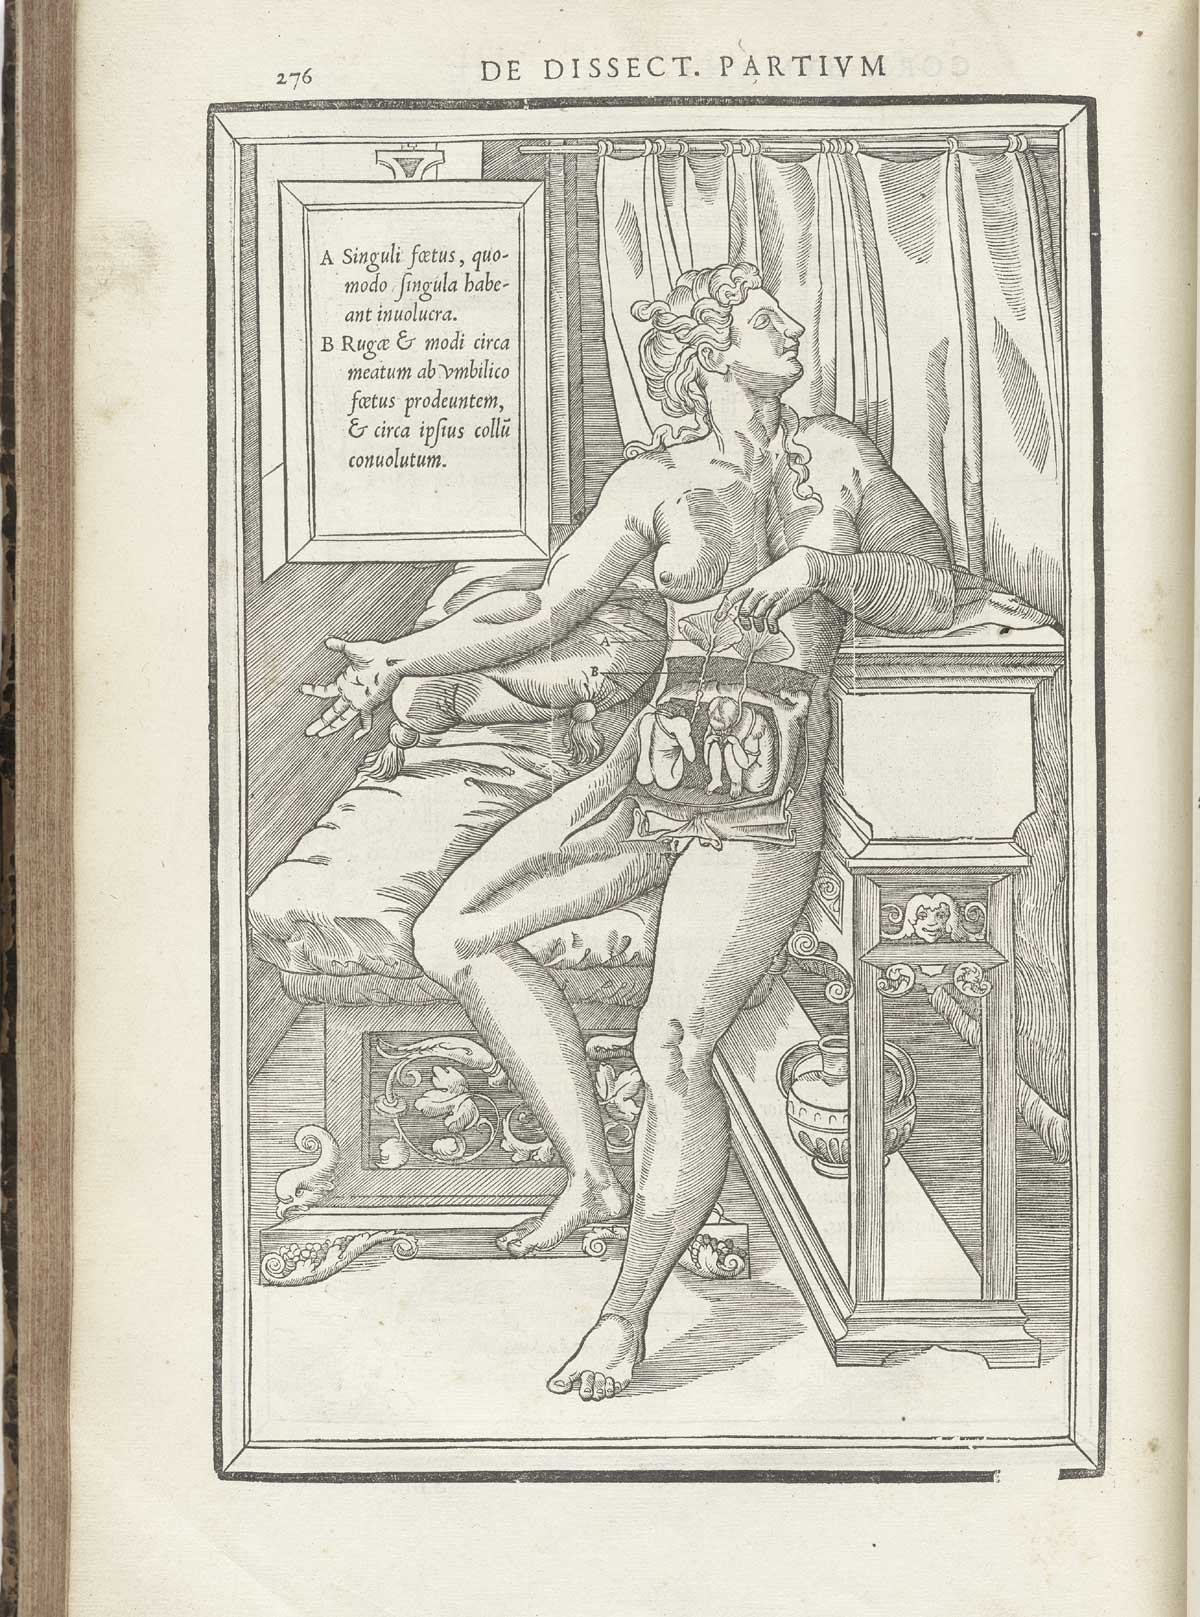 Woodcut of a facing pregnant female figure laying back on luxurious cushions with layers of flesh removed from the abdomen to reveal two placentas and fetuses; the woman has long flowing hair and is facing to the right; a tablet giving text in Latin about the indicated body parts hangs above and to the left of the figure; from Charles Estienne’s De dissection partium corporis humani libri tres, NLM Call no.: WZ 240 E81dd 1545.